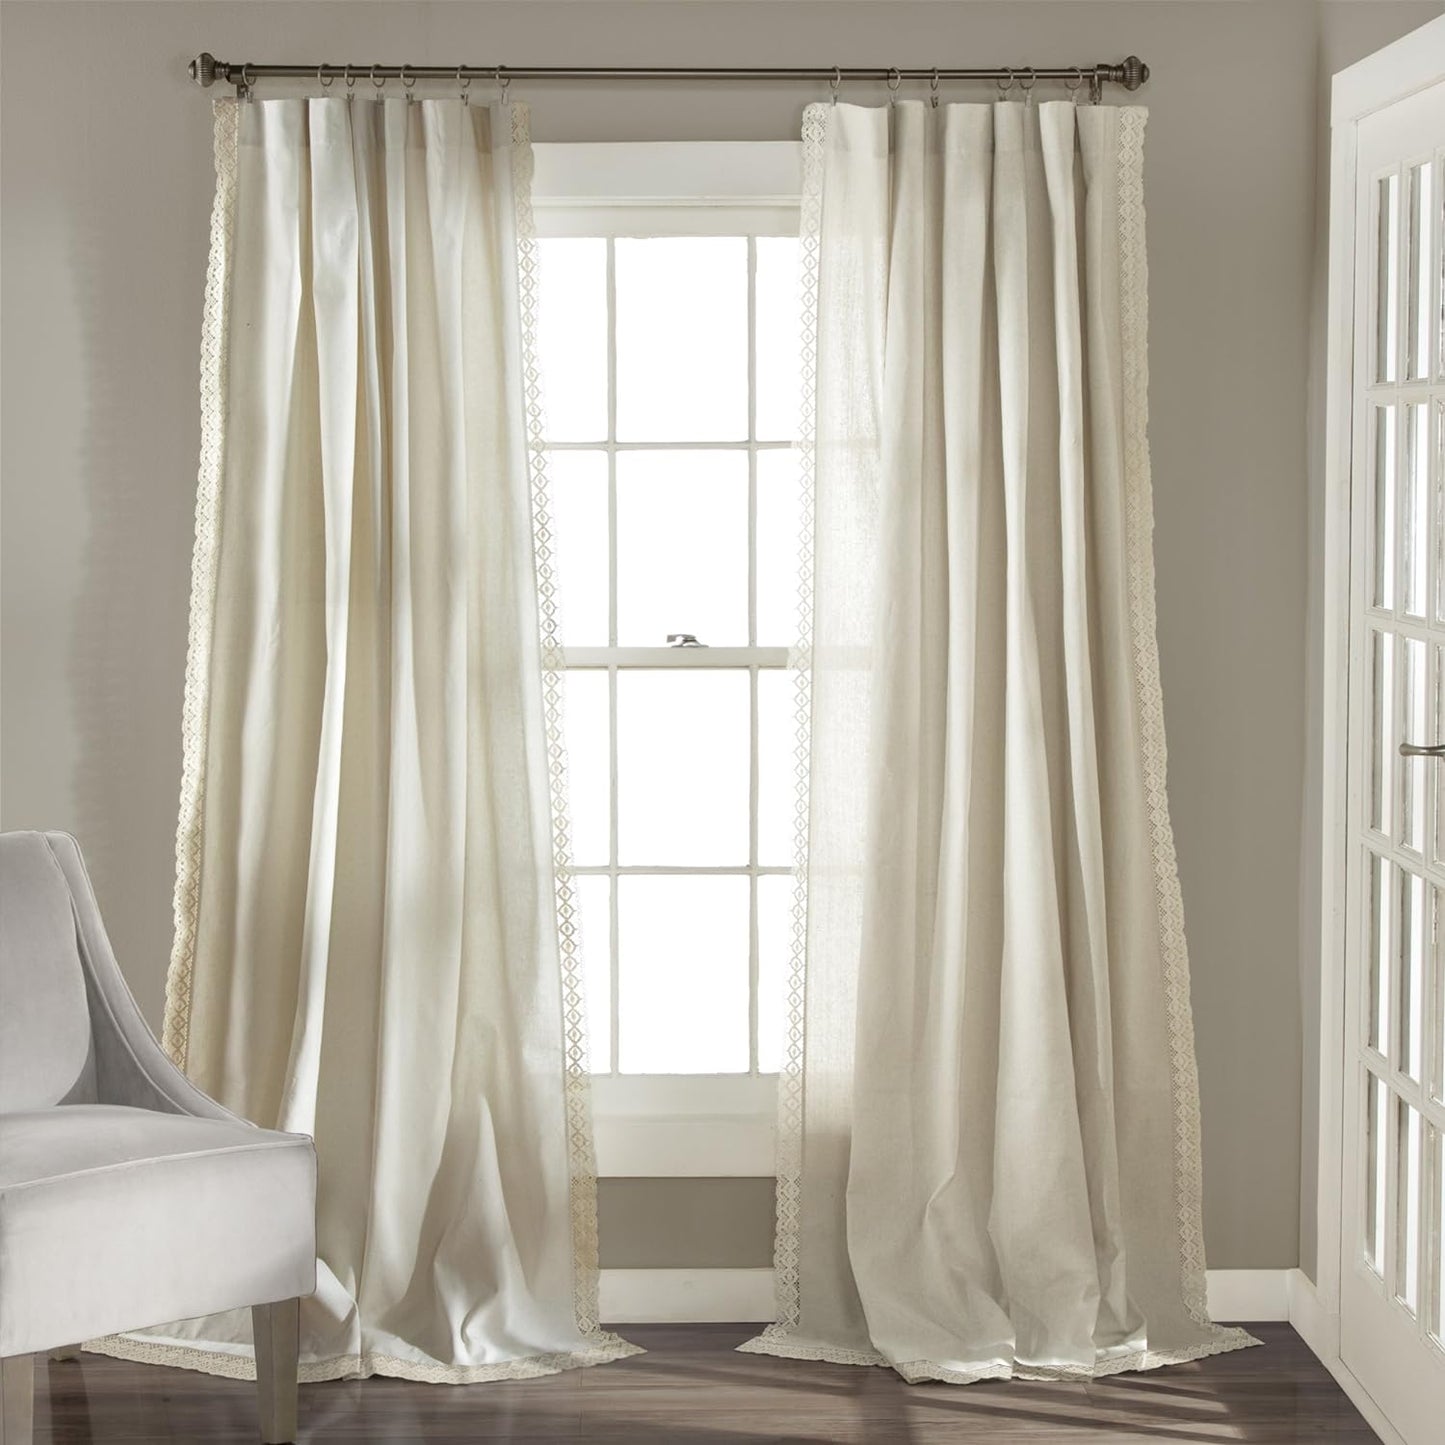 Lush Decor Rosalie Light Filtering Window Curtain Panel Set- Pair- Vintage Farmhouse & French Country Style Curtains - Timeless Dreamy Drape - Romantic Lace Trim - 54" W X 84" L, White  Triangle Home Fashions Ivory Window Panel 54"W X 108"L